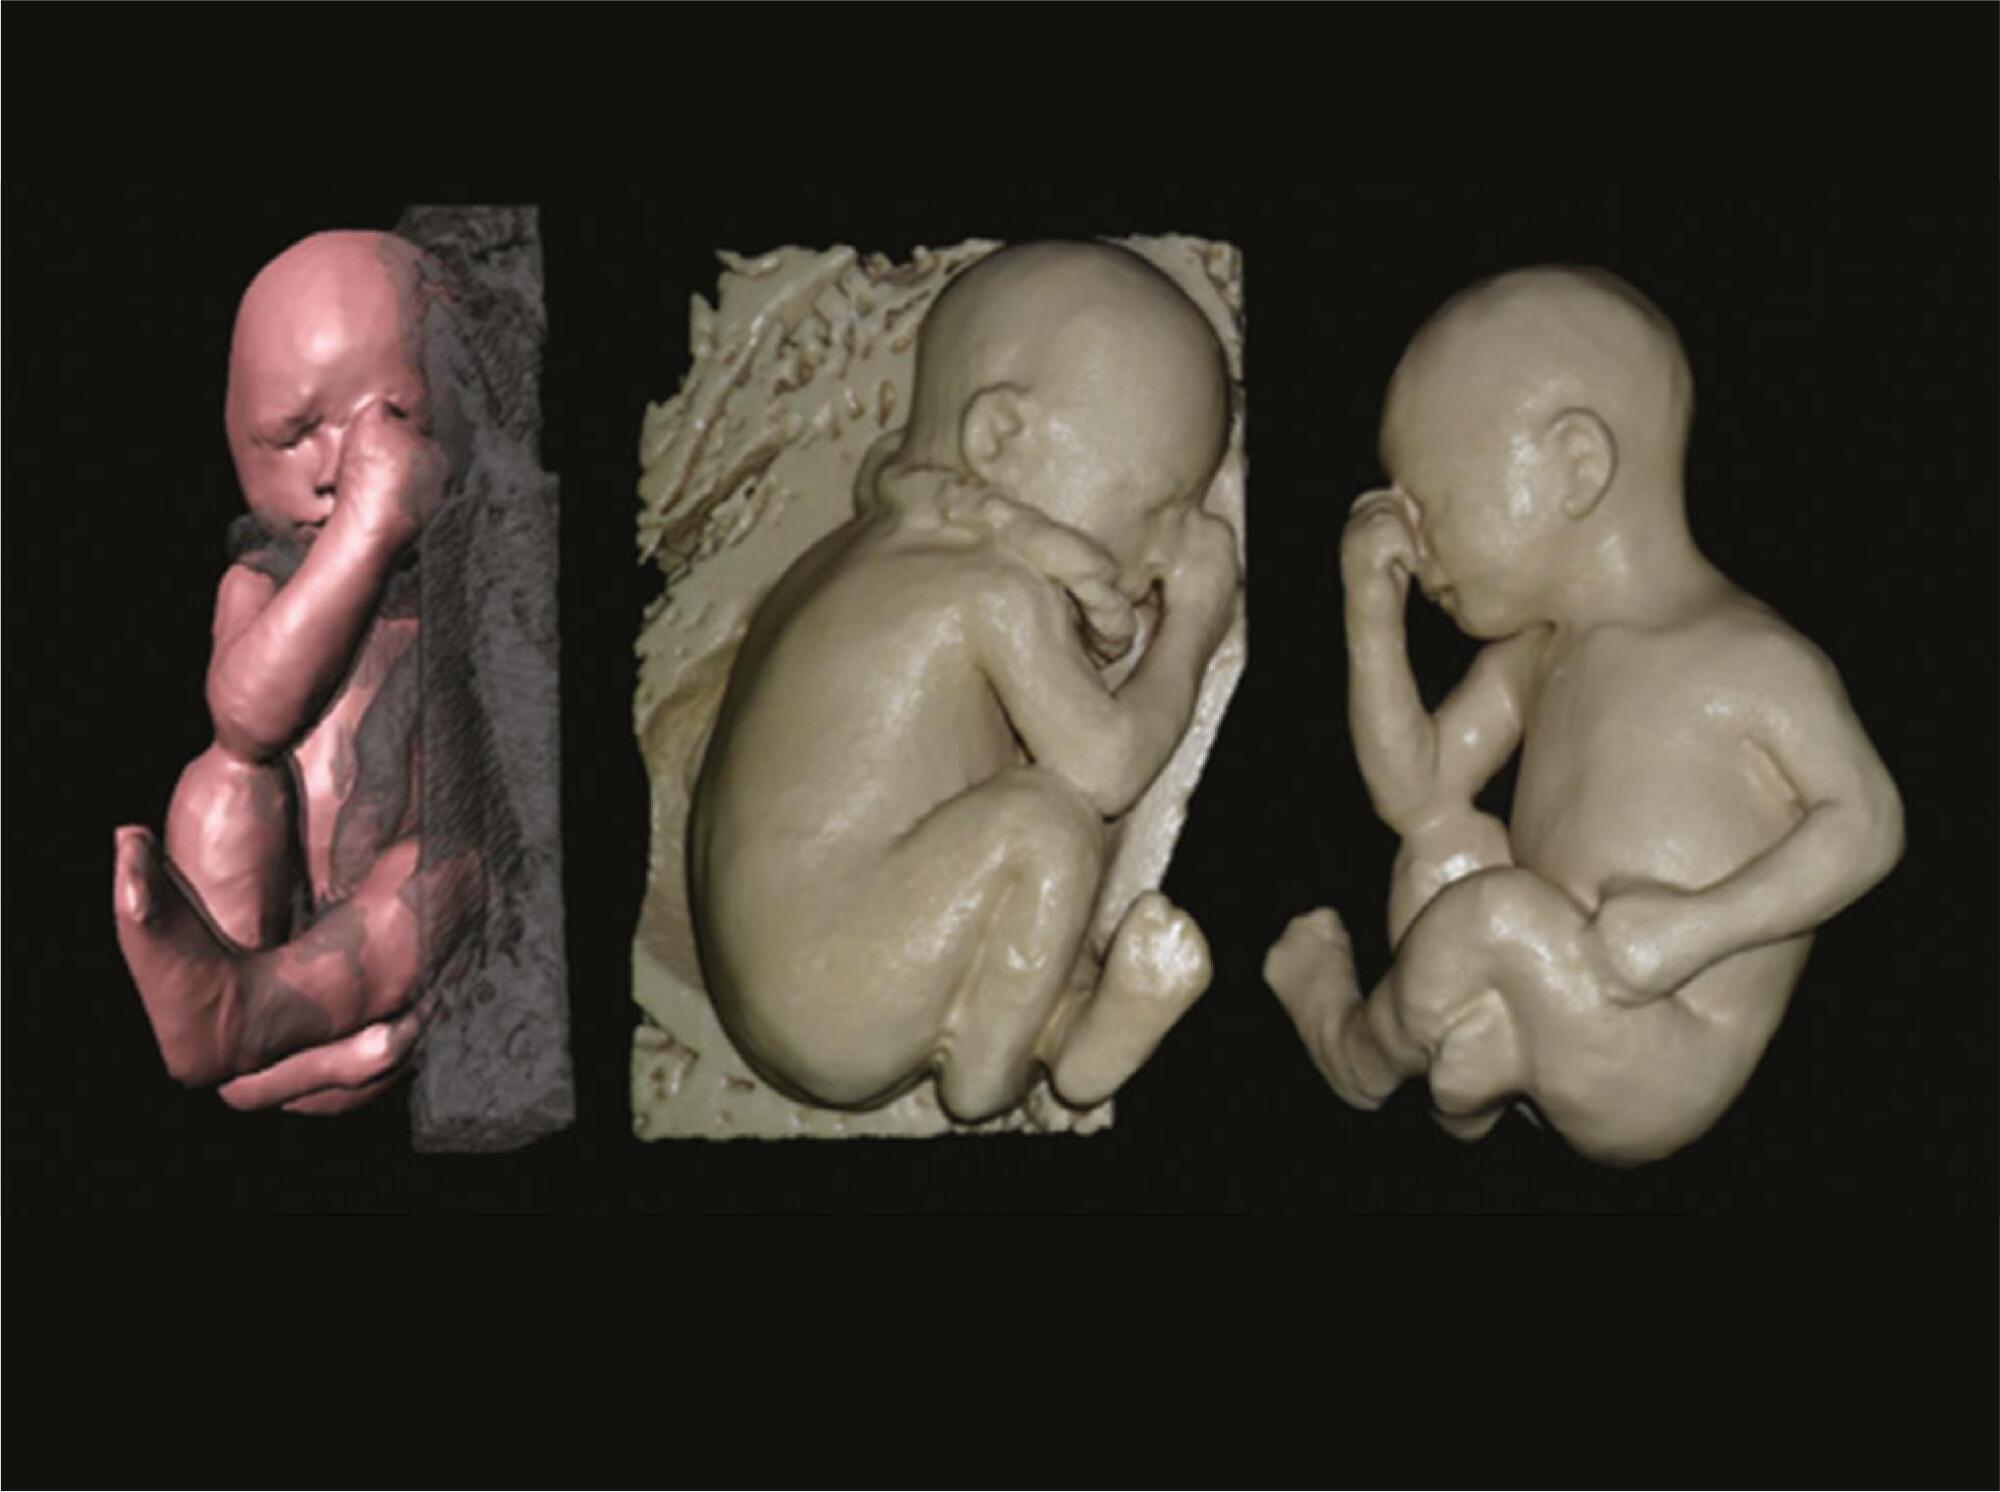 Physical models of the foetus created using magnetic resonance imaging, computed tomography, and ultrasound data: history, description, and potential uses